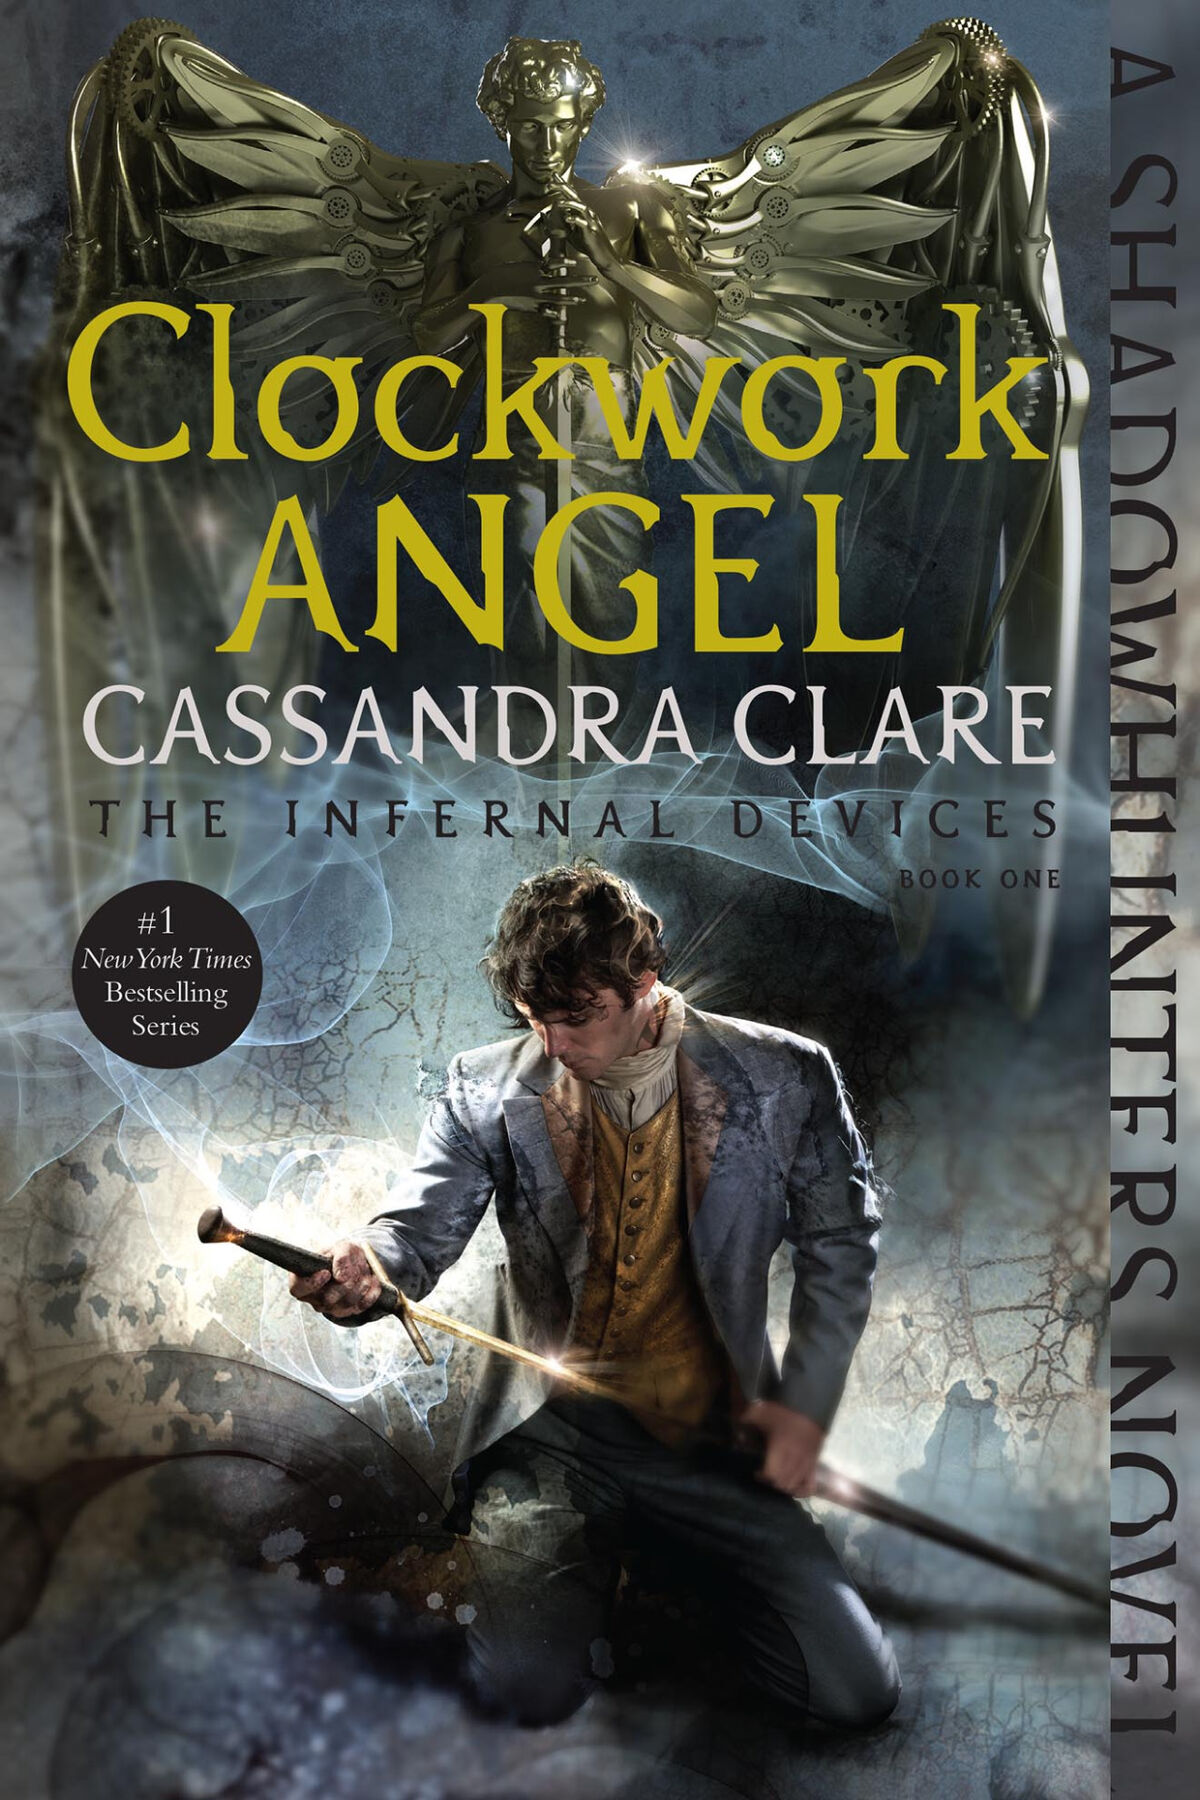 Cassandra Clare's Latest Book Temporarily De-Listed by